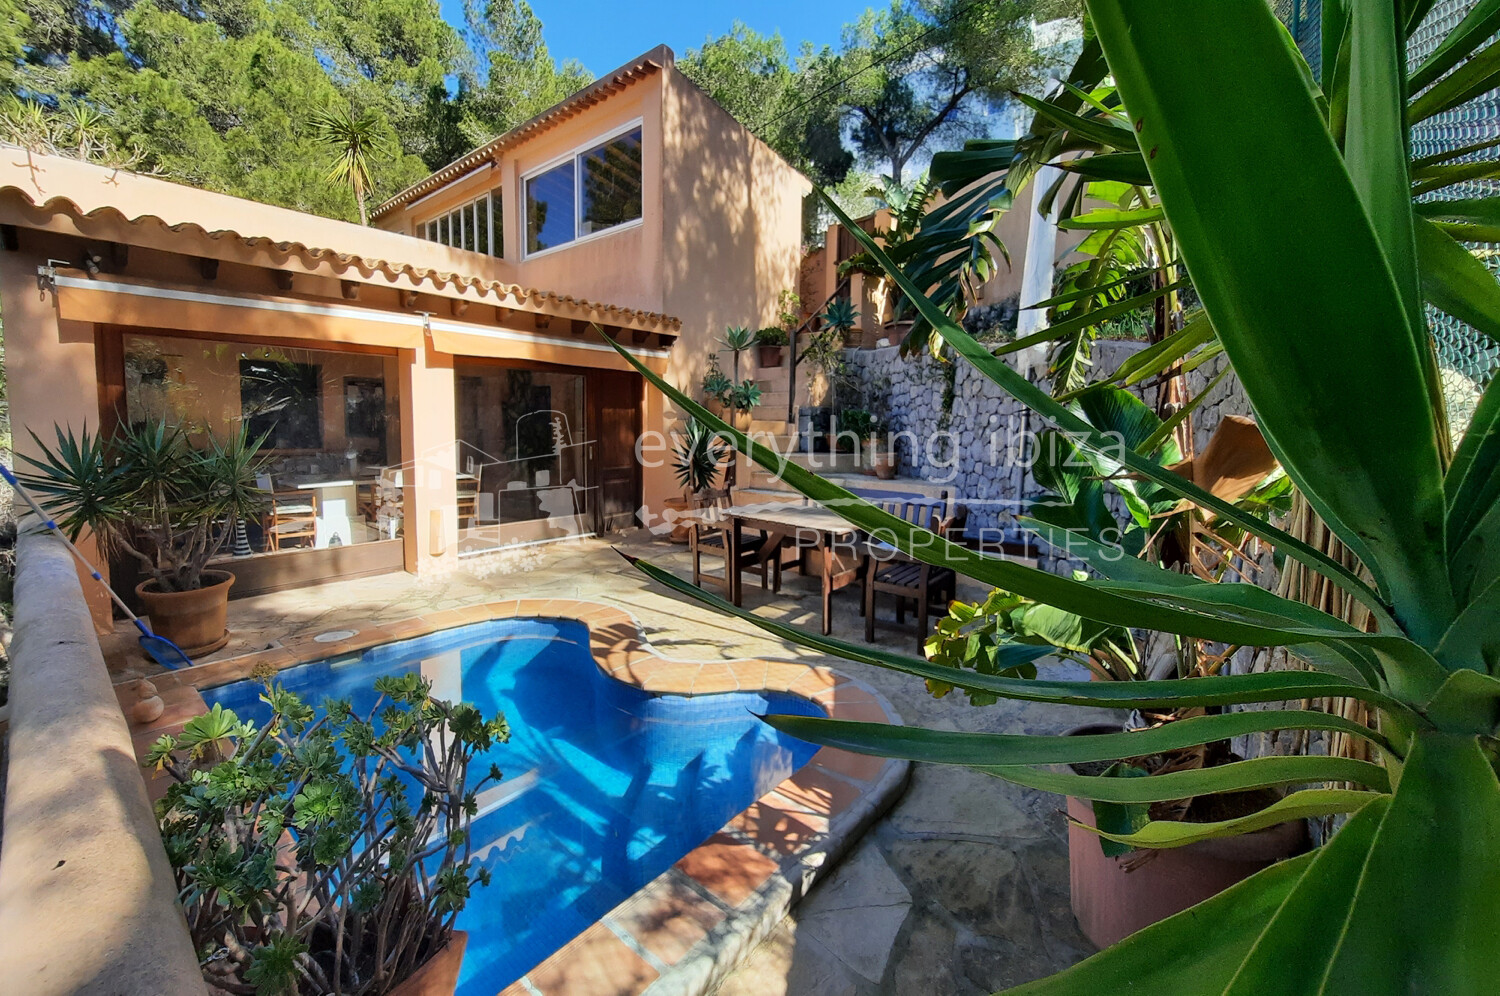 Charming Authentic Villa in a Hillside Position Overlooking Las Salinas, ref. 1702, for sale in Ibiza by everything ibiza Properties